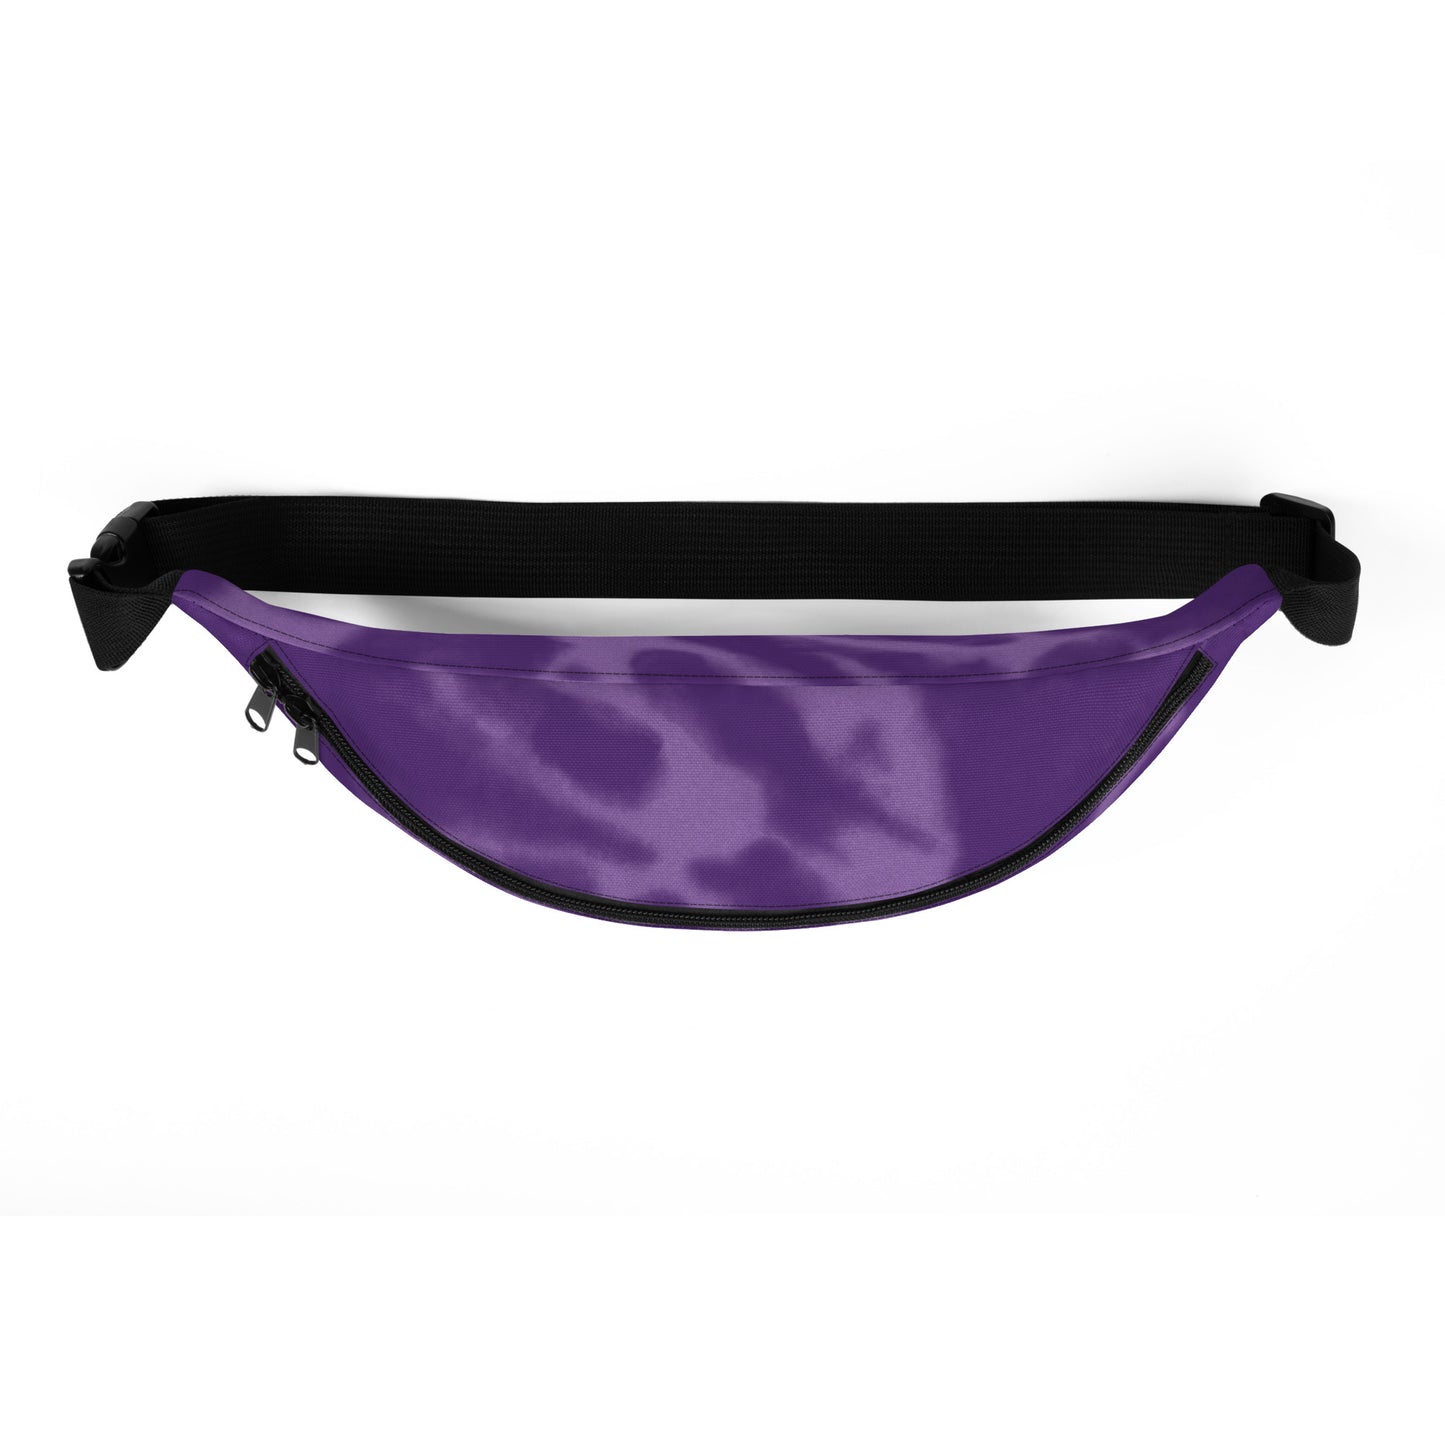 Travel Gift Fanny Pack - Purple Tie-Dye • YQB Quebec City • YHM Designs - Image 08